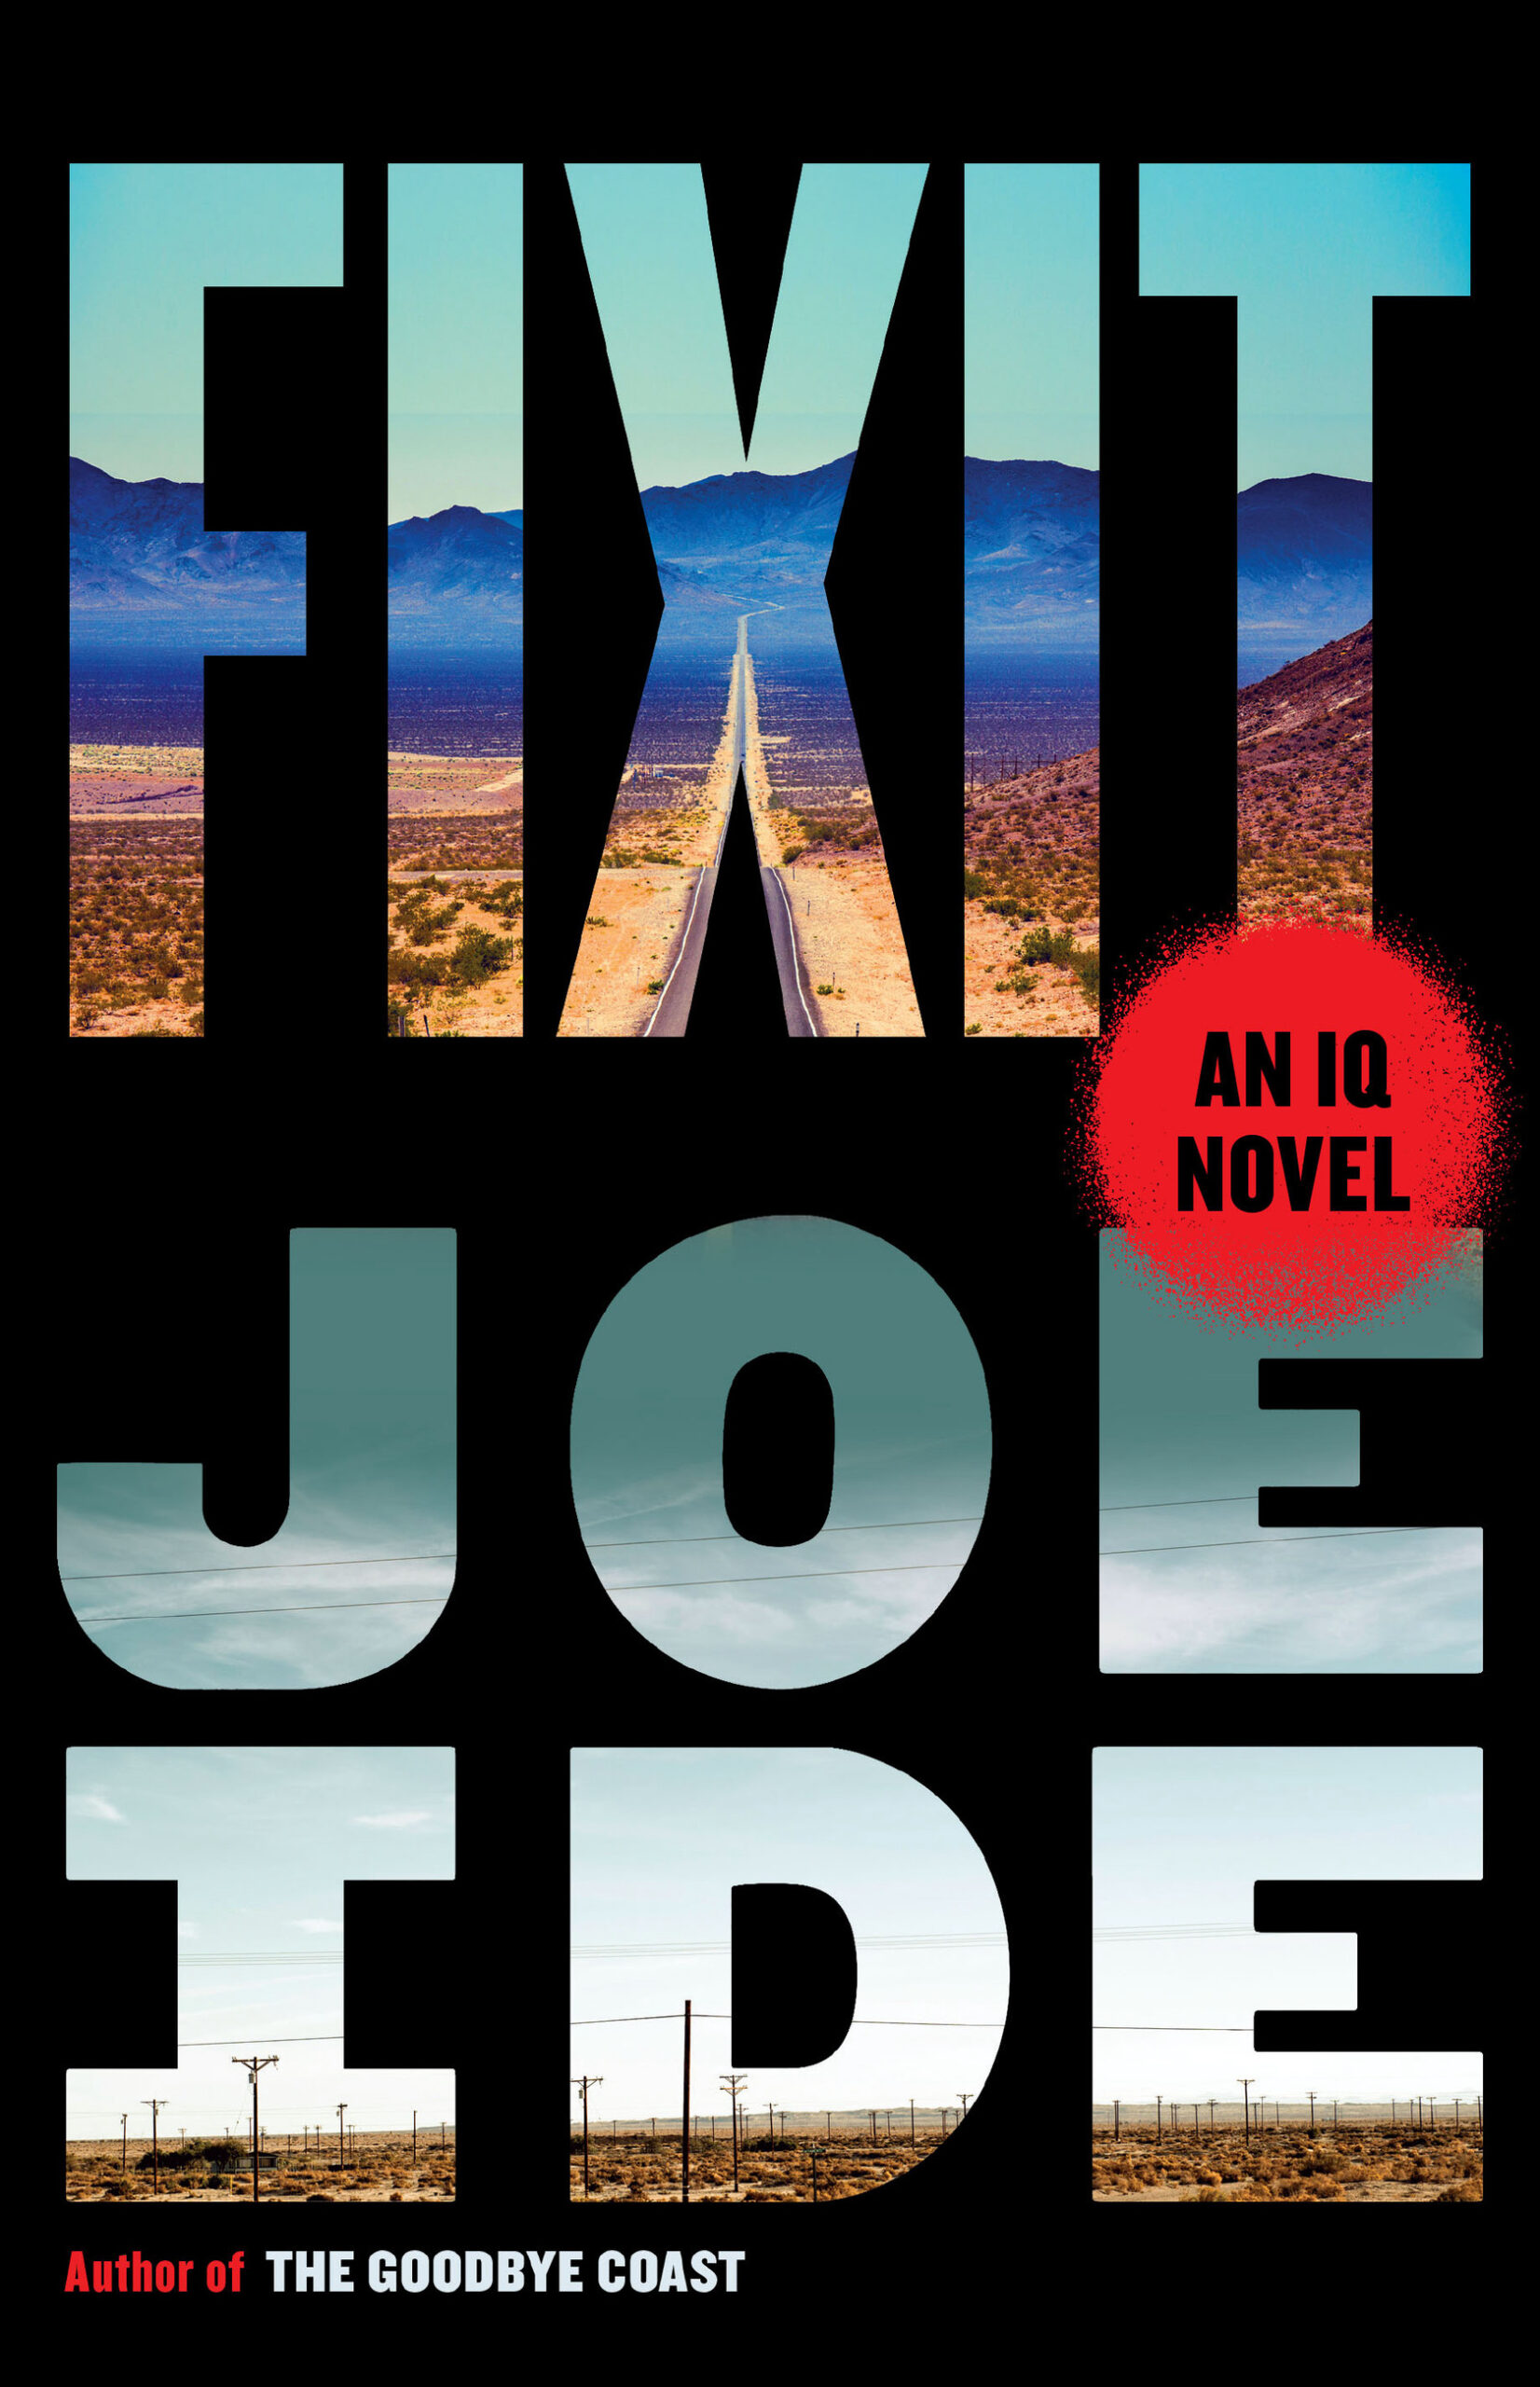 The book cover of Joe Ide's Fixit